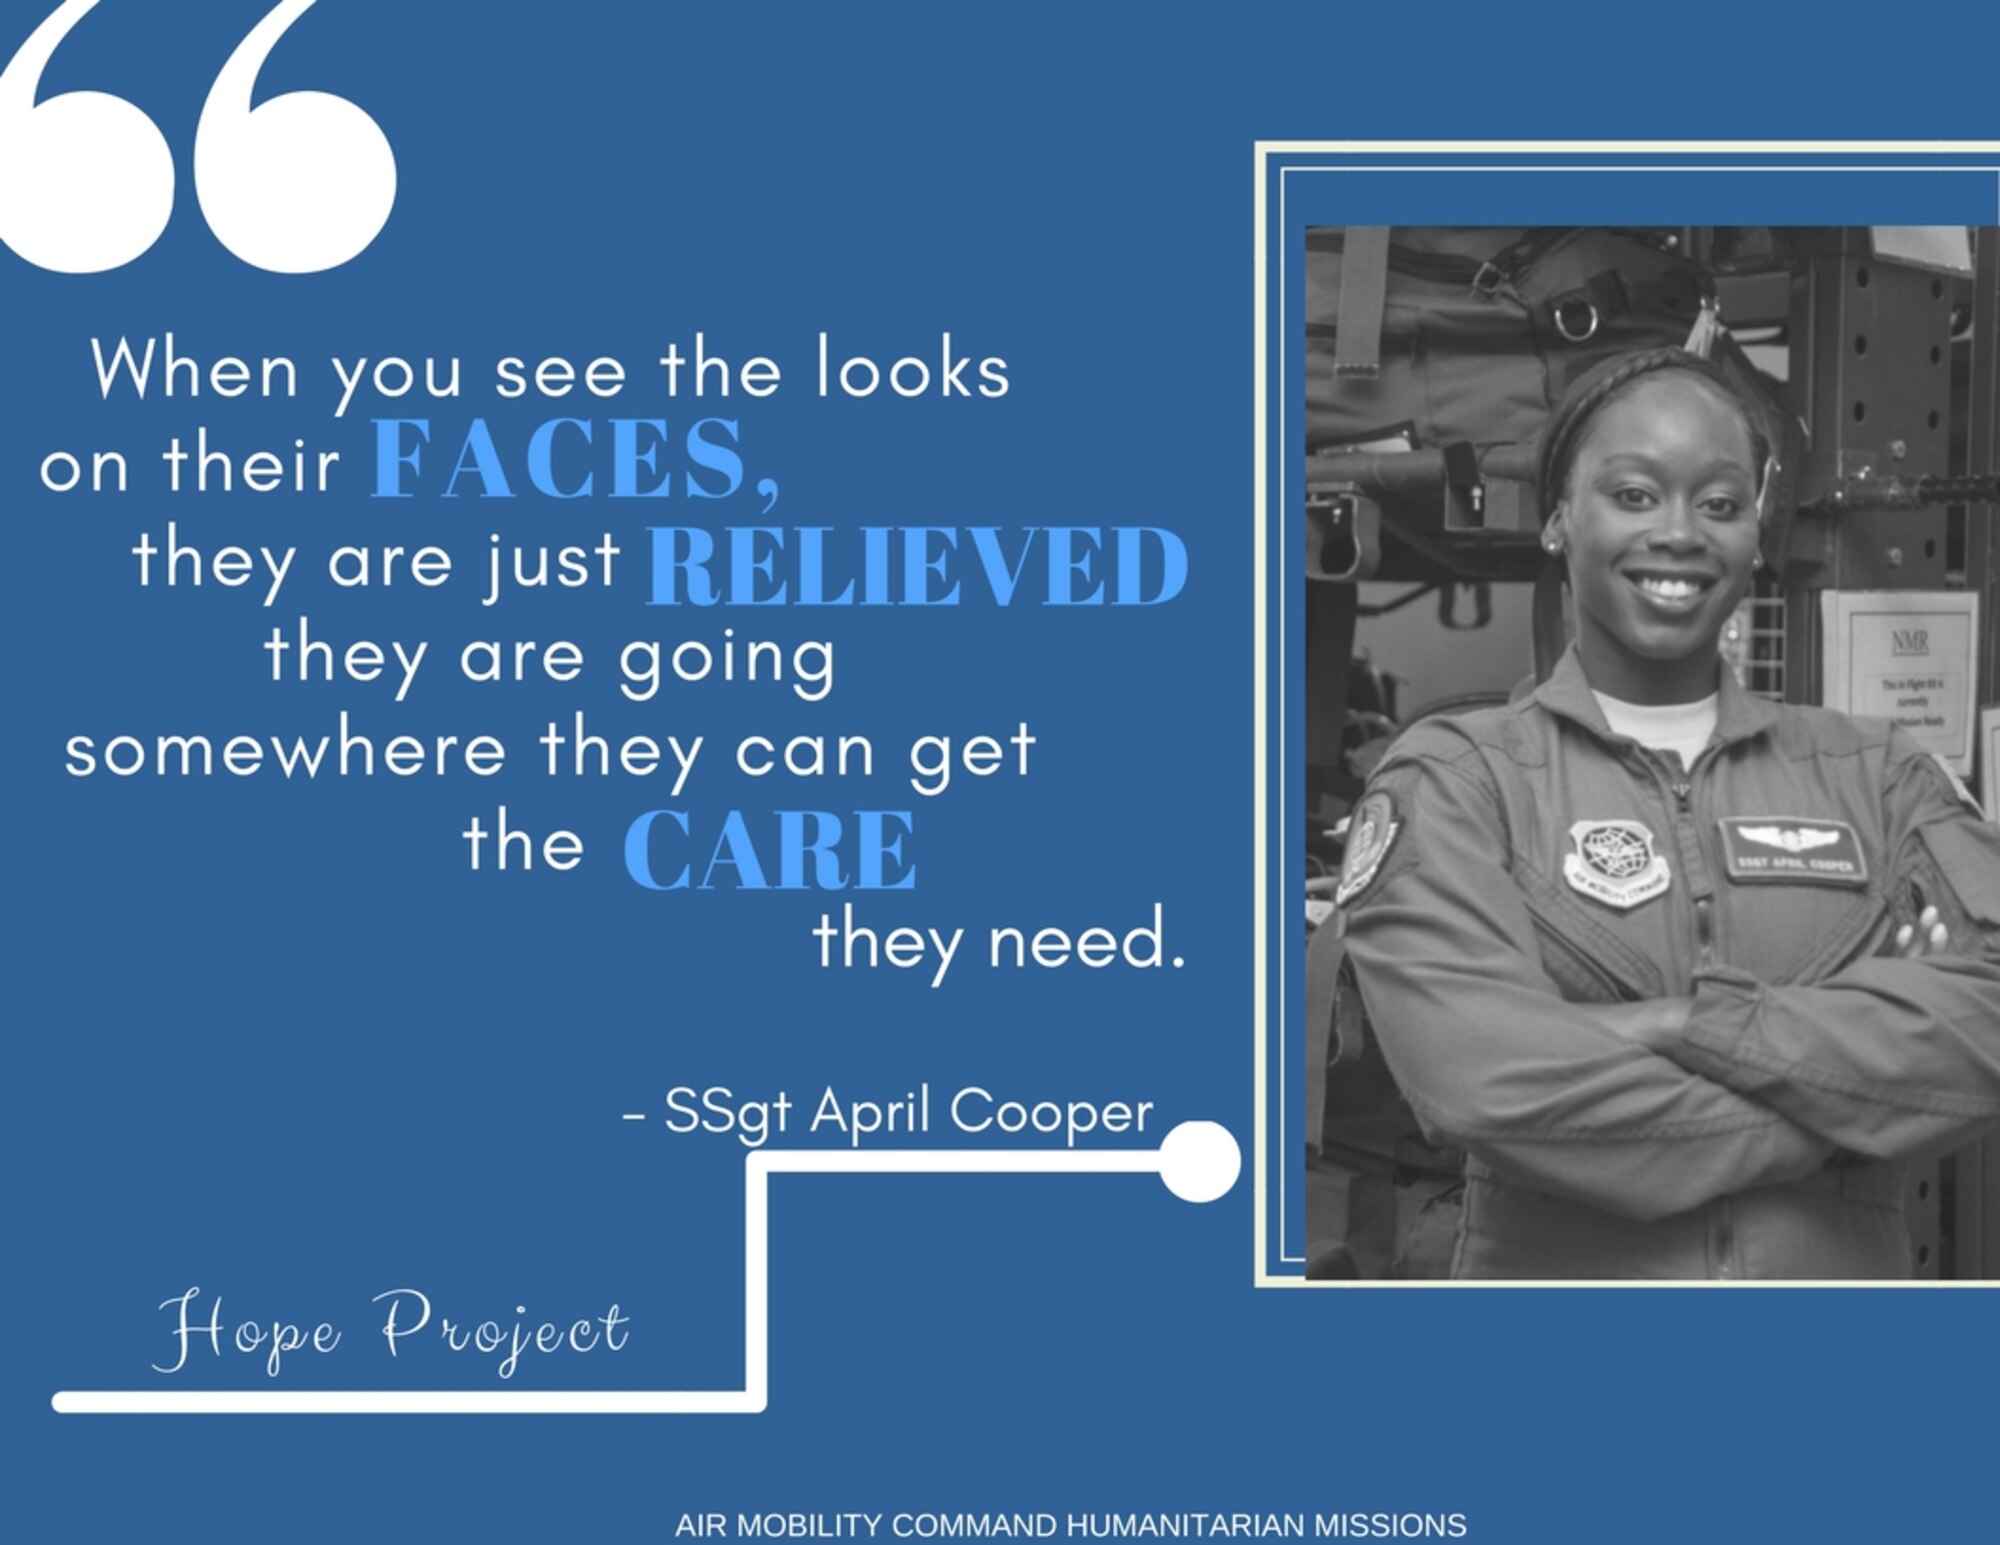 Staff Sergeant April Cooper, an aeromedical evacuation technician at Scott Air Force Base, Illinois, had just returned from Little Rock Air Force Base, Arkansas, after providing support for Hurricane Harvey. Knowing Hurricane Maria was about to make landfall, she left her bags right by her front door.  She was still on Bravo alert and knew when Maria hit, AE support would be needed quickly.
This second mission would last three weeks at MacDill AFB, Florida, compared to her five day mission at Little Rock. Her time in Arkansas would help prepare her for the mission of multiple flights to St. Croix in the near future.